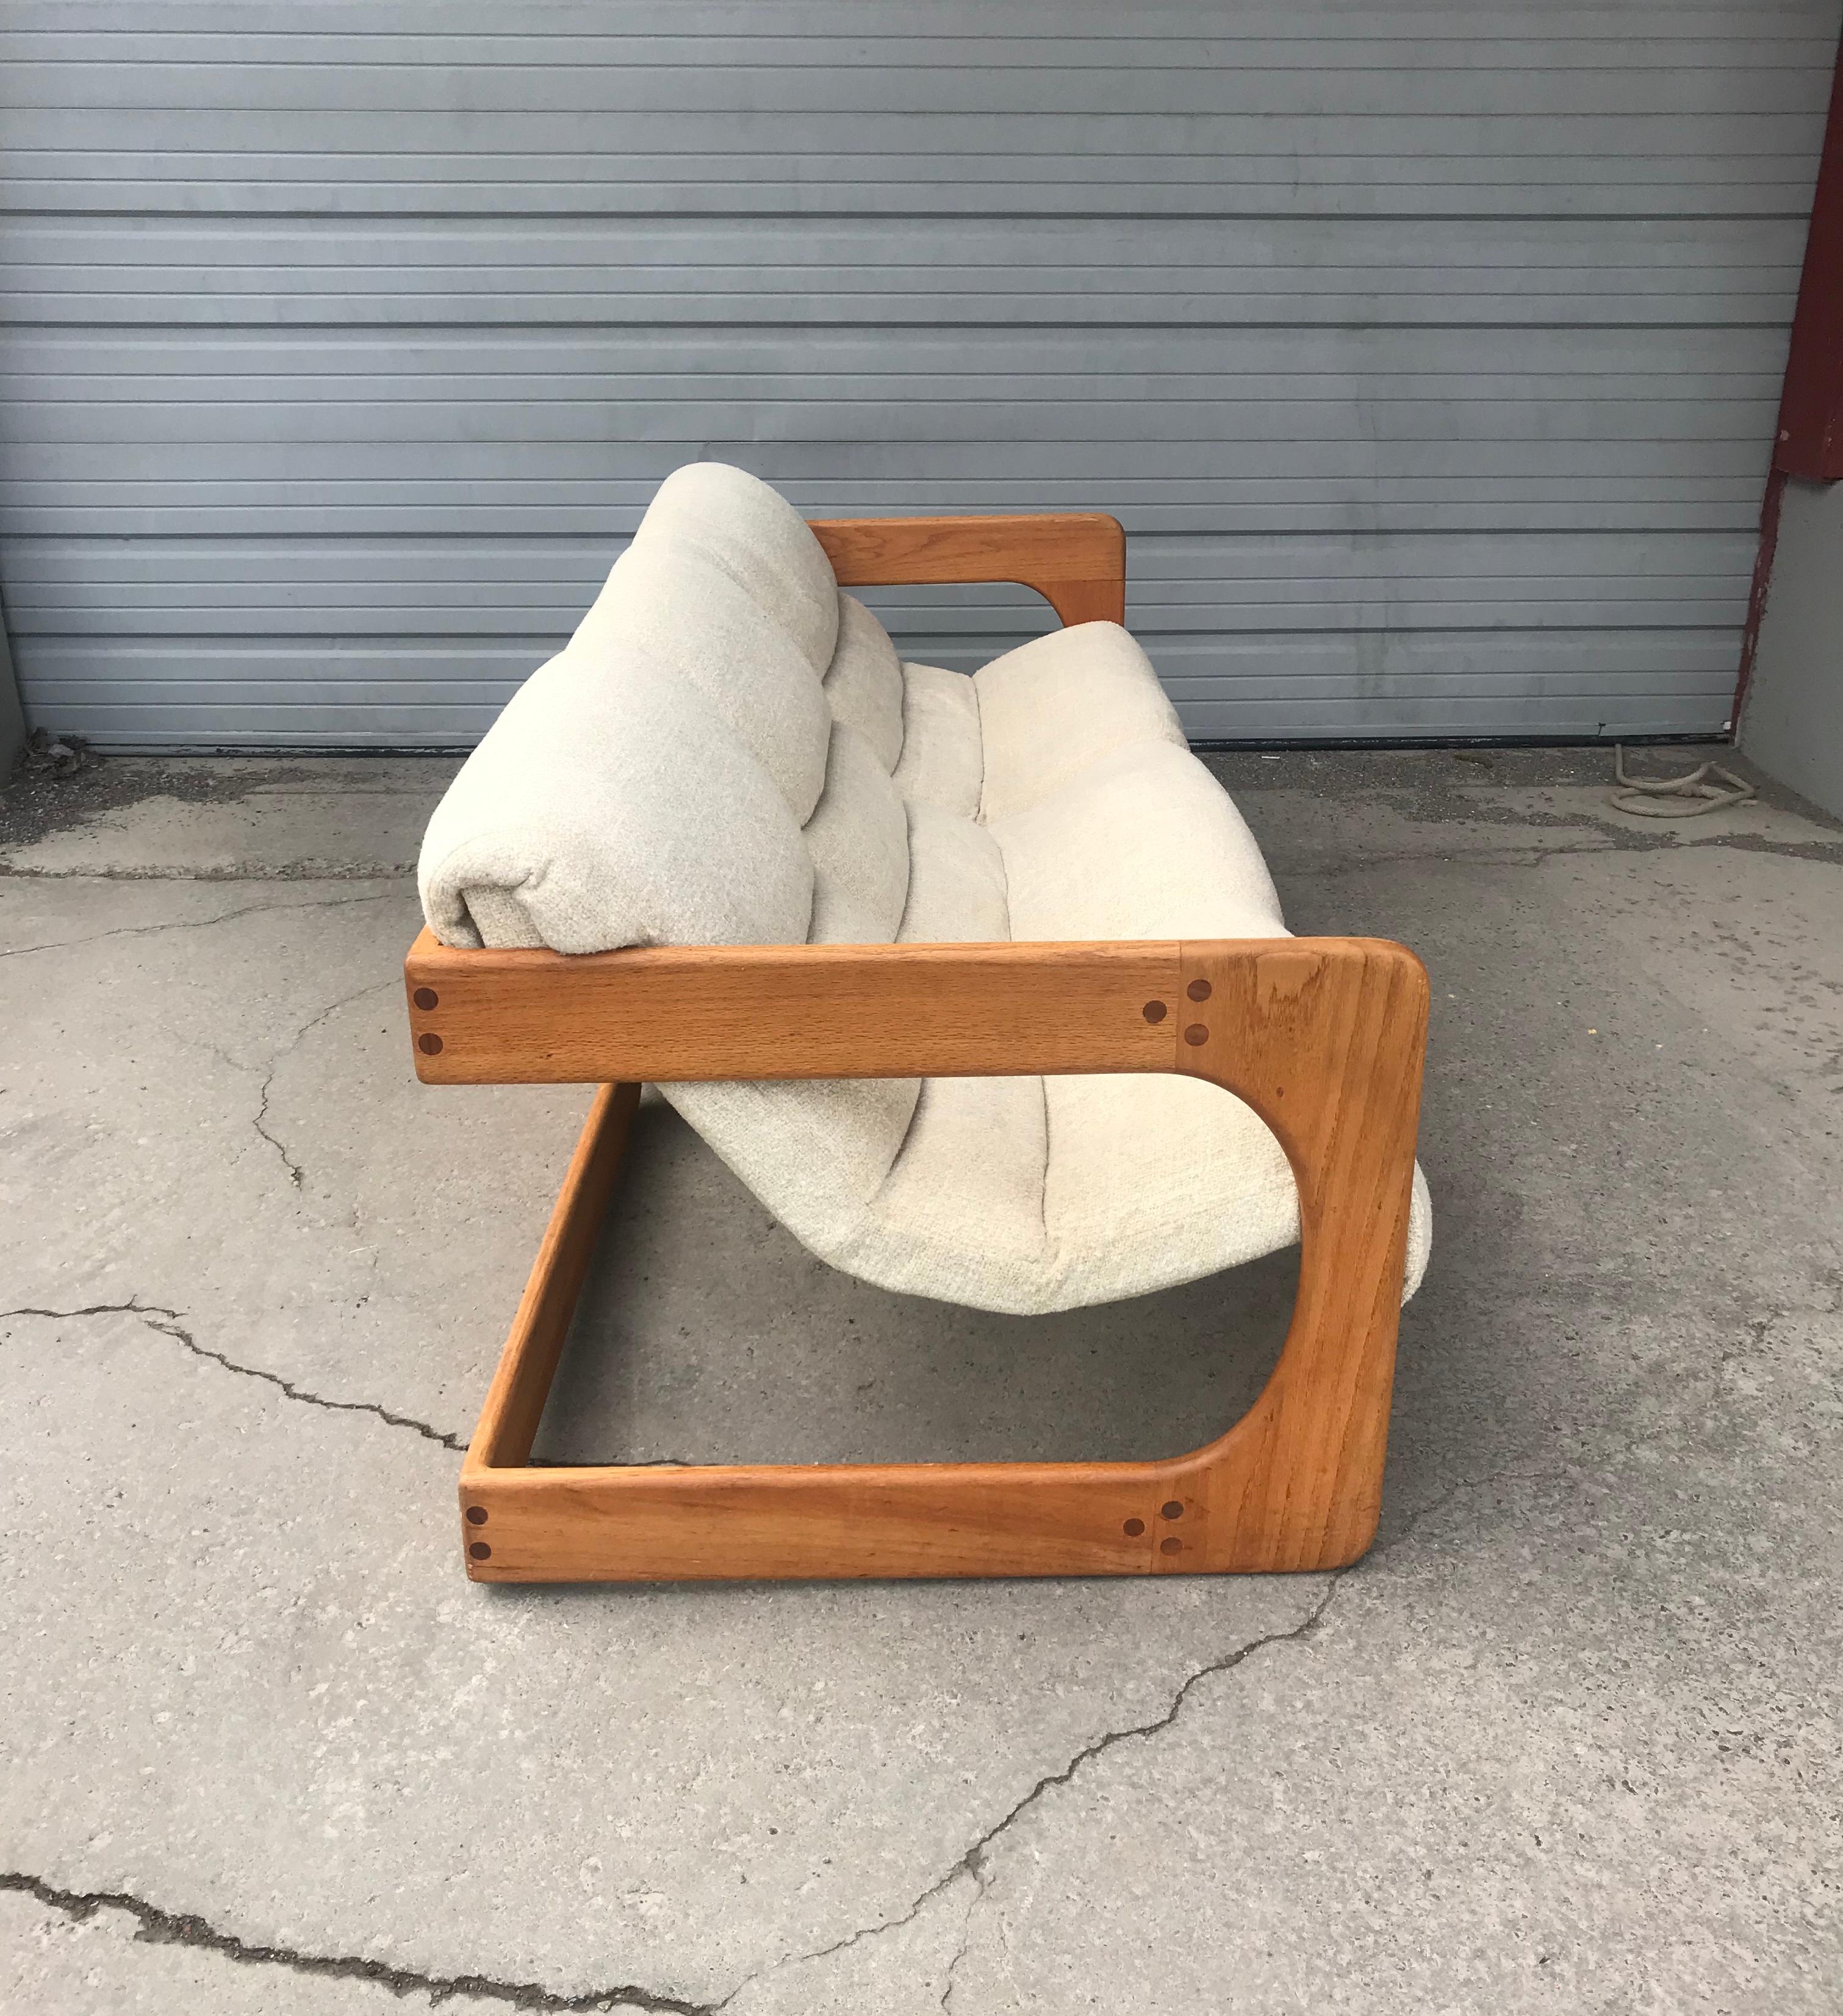 Rare 3-Seat Sofa Designed by Lou Hodges, California Design Group 1970 Modernist In Good Condition For Sale In Buffalo, NY